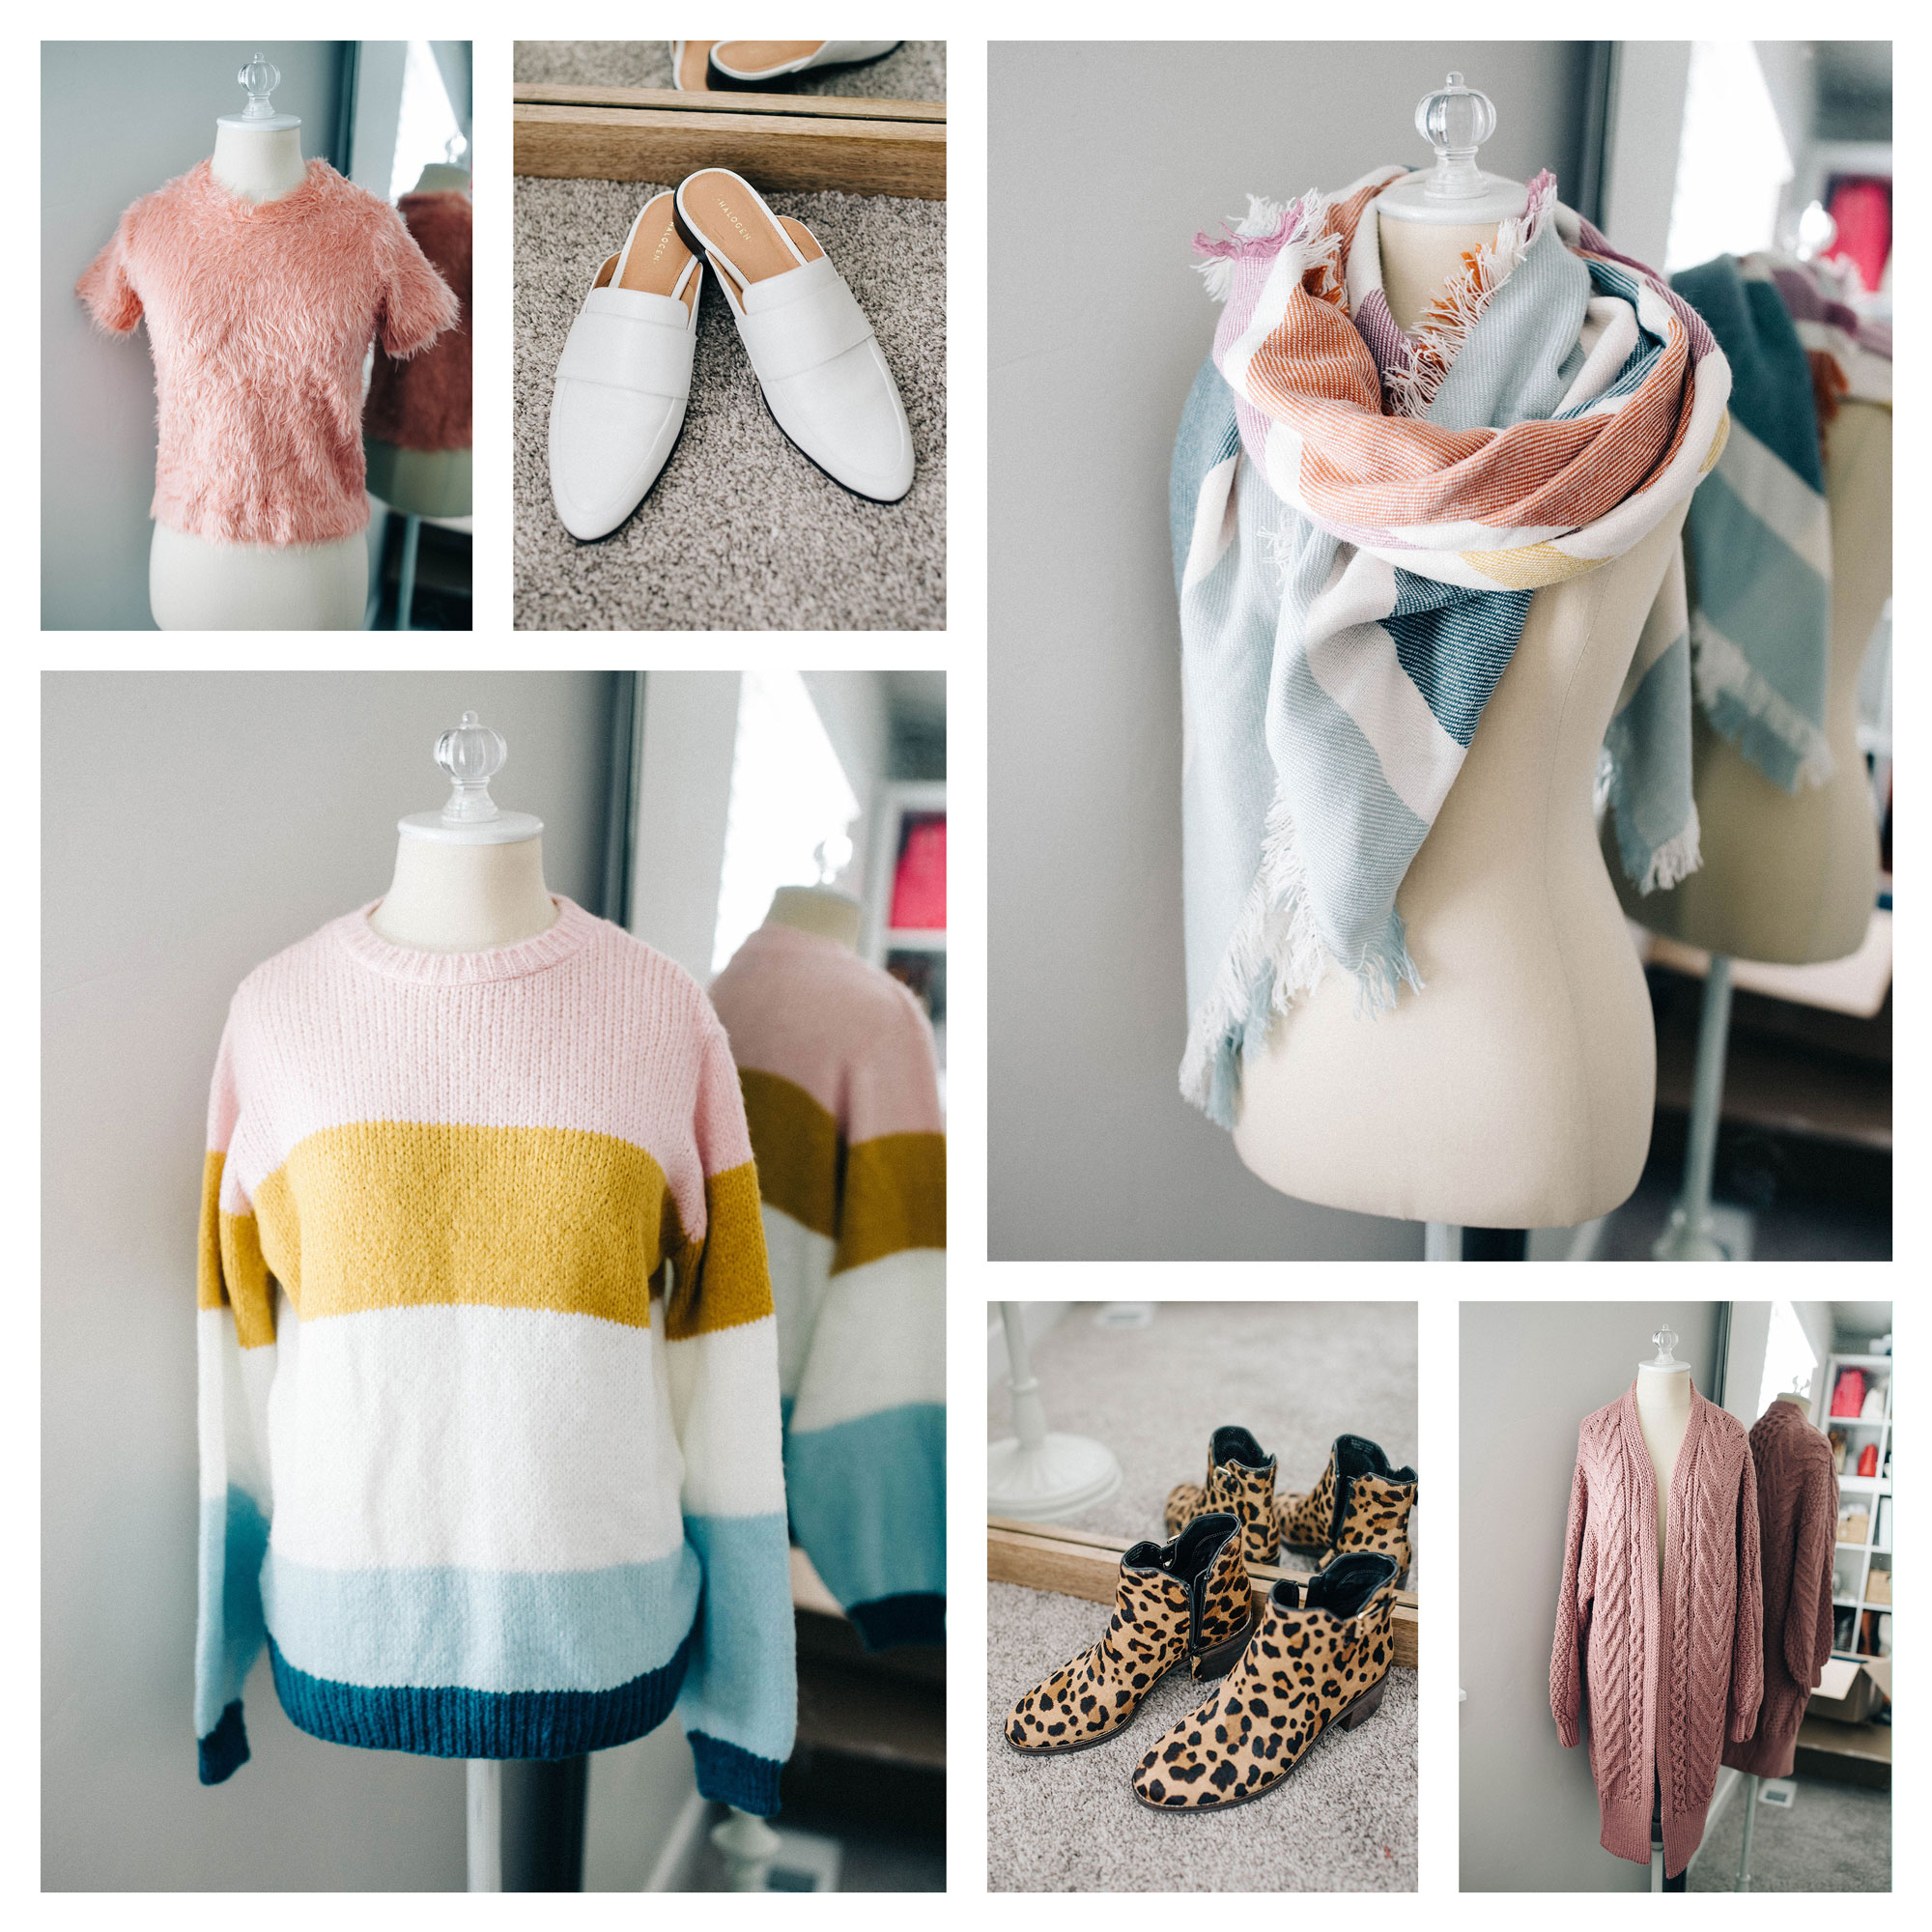 2018 Nordstrom Sale: What I'm Keeping For My Capsule Wardrobe | Little Miss Fearless